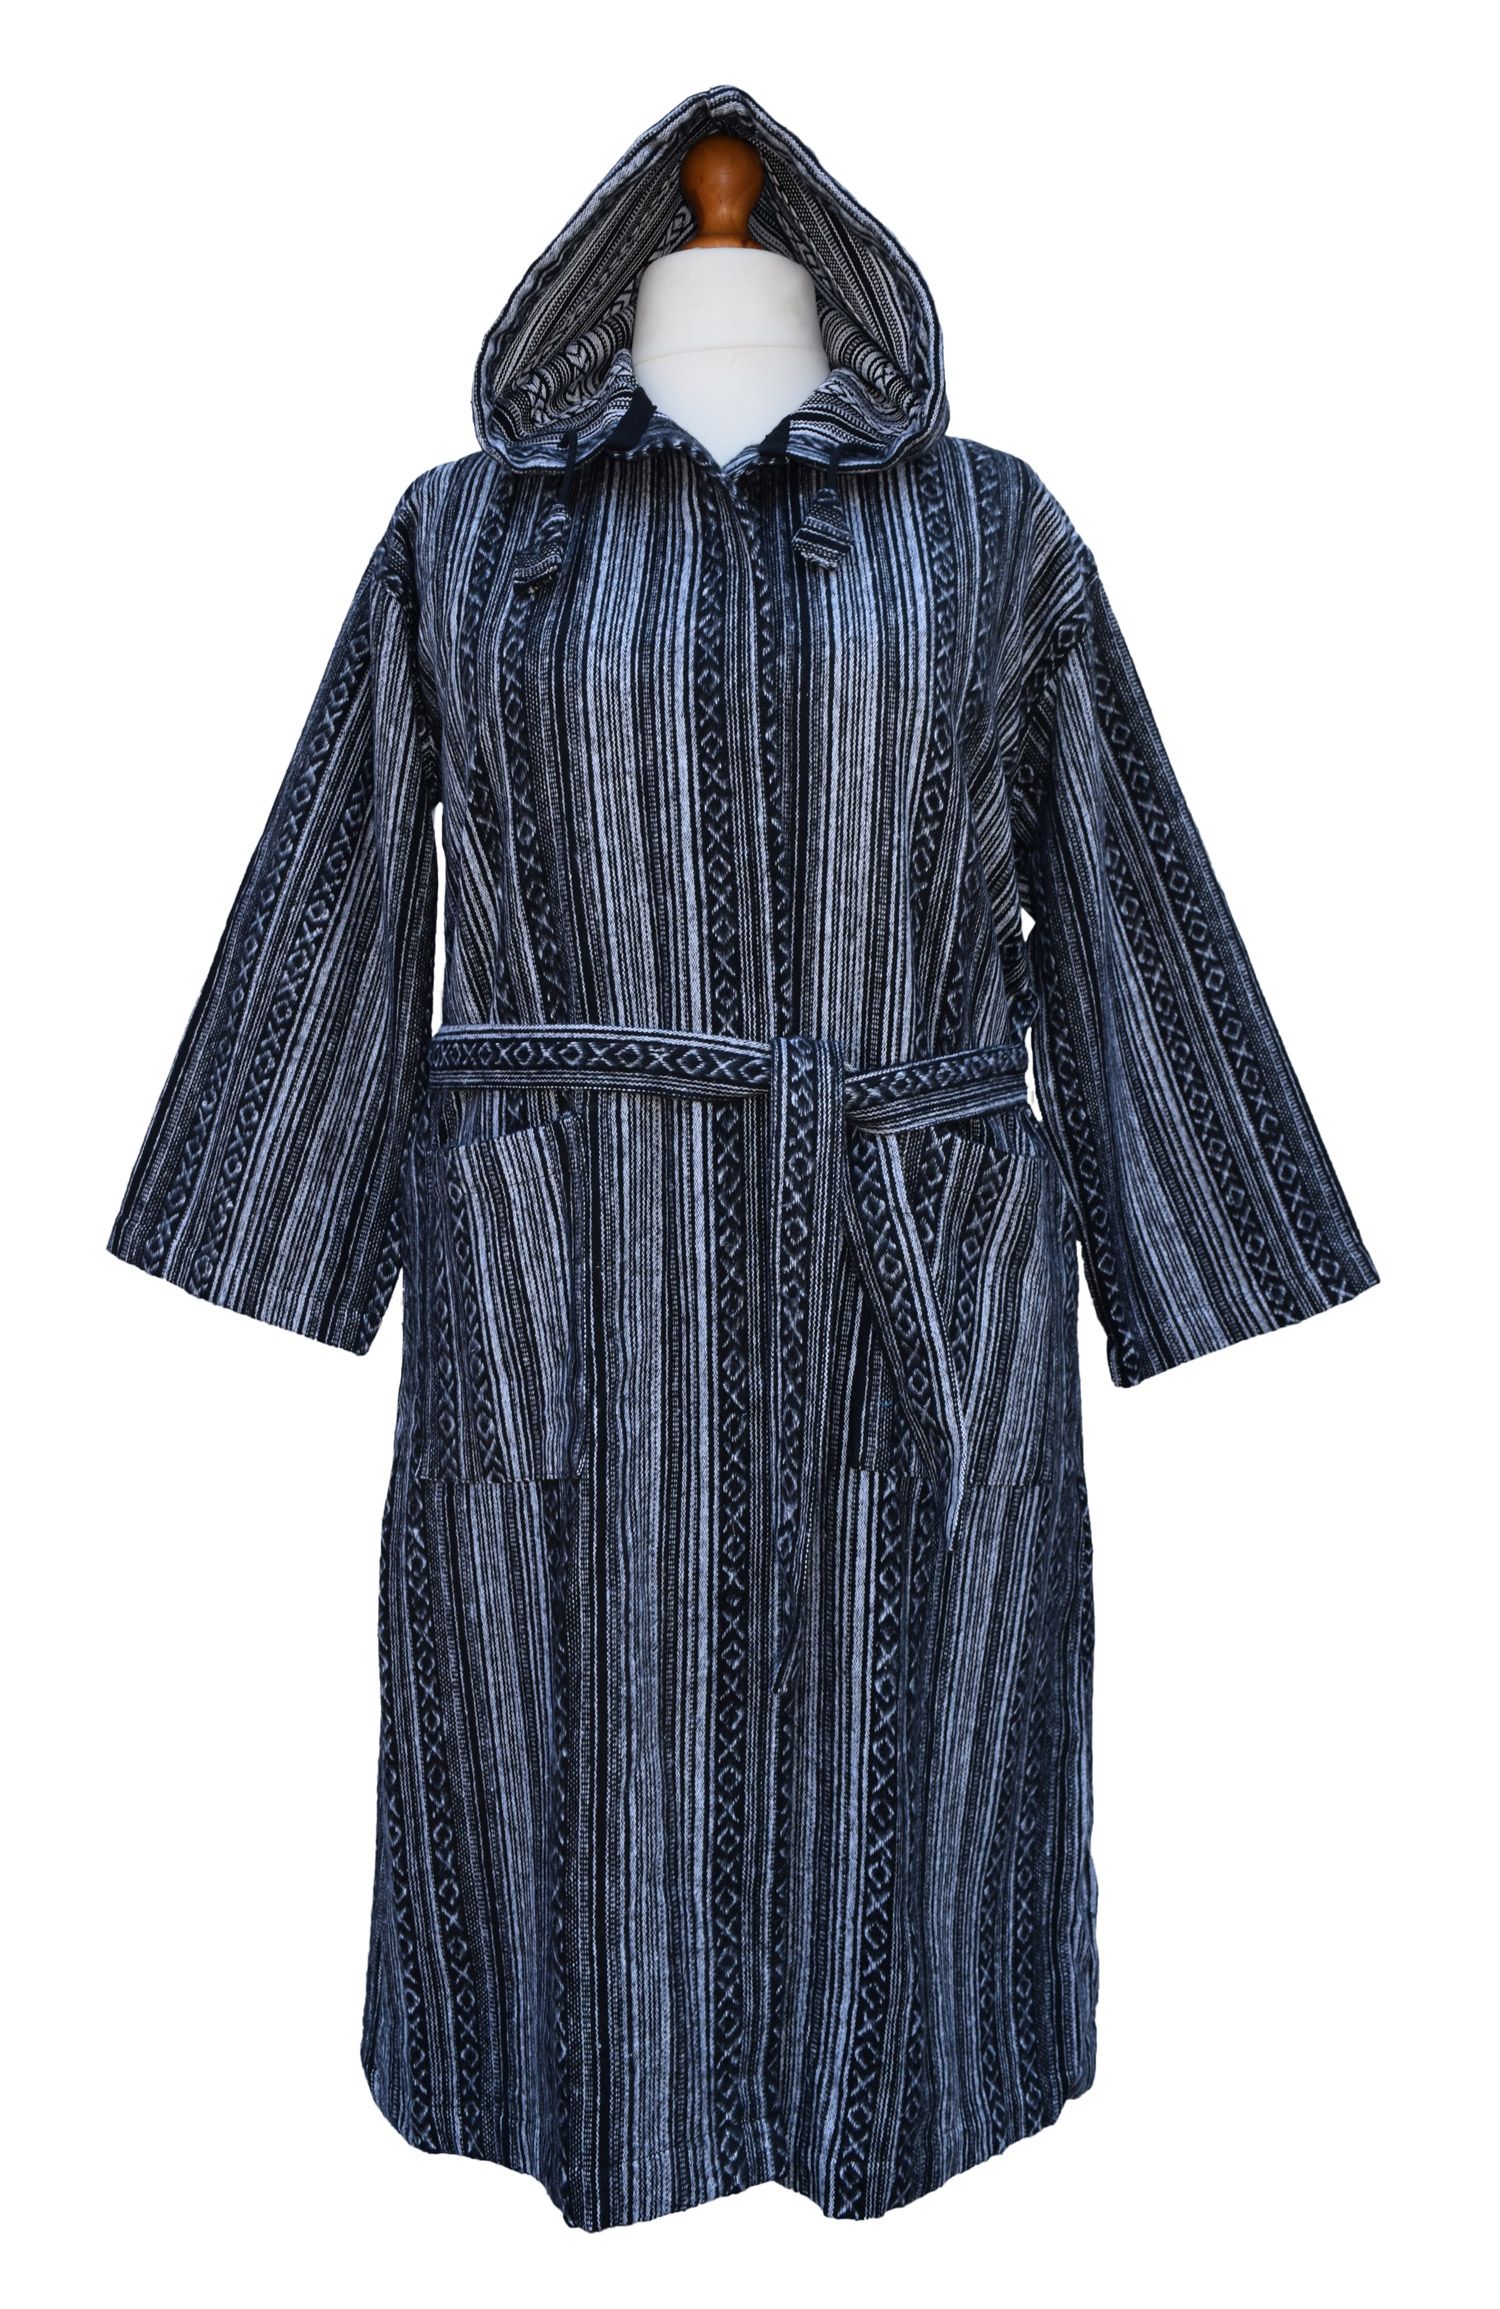 Gheri - soft brushed cotton - dressing gown/robe - black and white ...